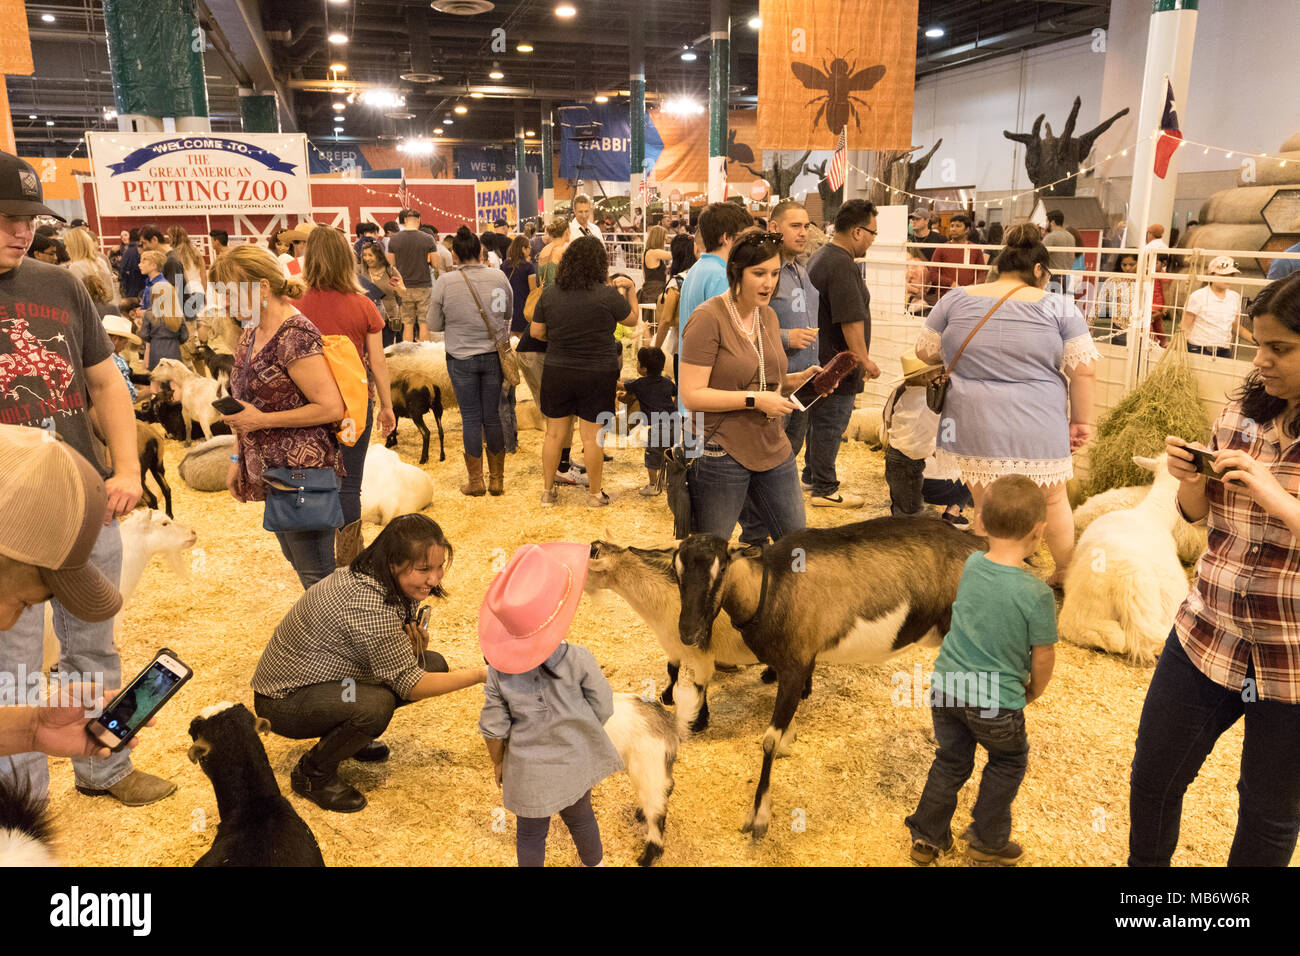 Parents, young children and animals in the Petting Zoo, Houston Livestock Show and Rodeo, Houston, Texas USA Stock Photo